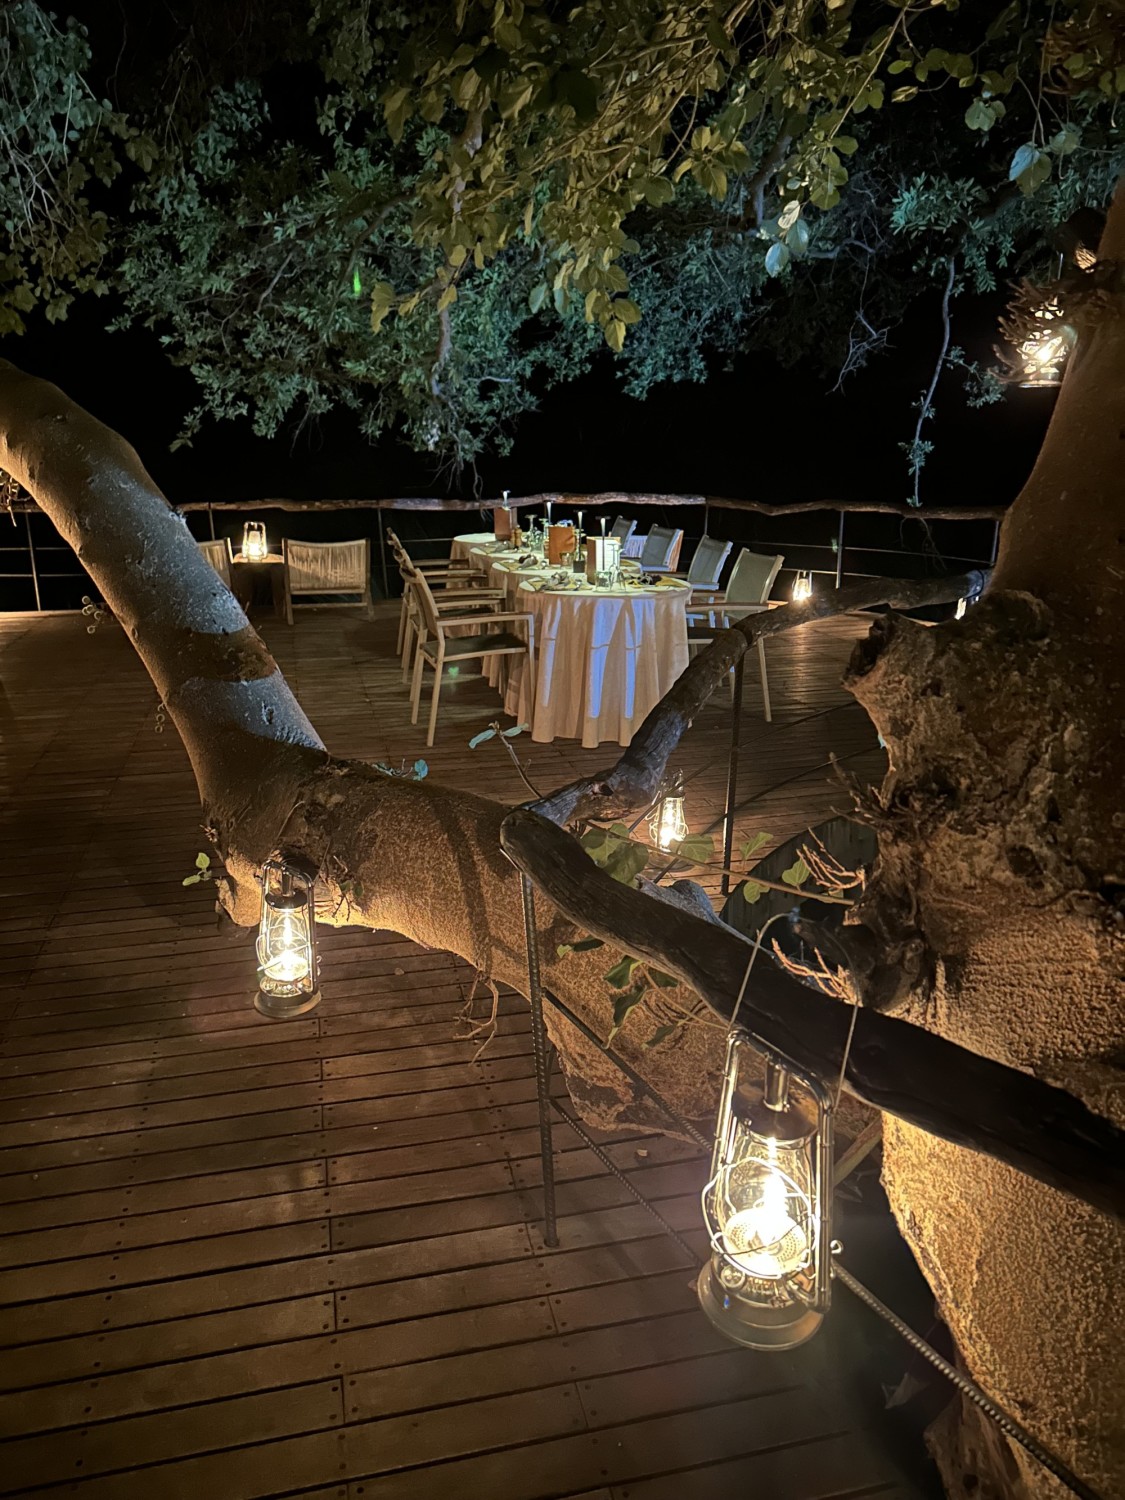 A table set up with a white tablecloth on an outdoor deck for a candlelight dinner under the stars with lanterns hanging from the trees at Sandibe